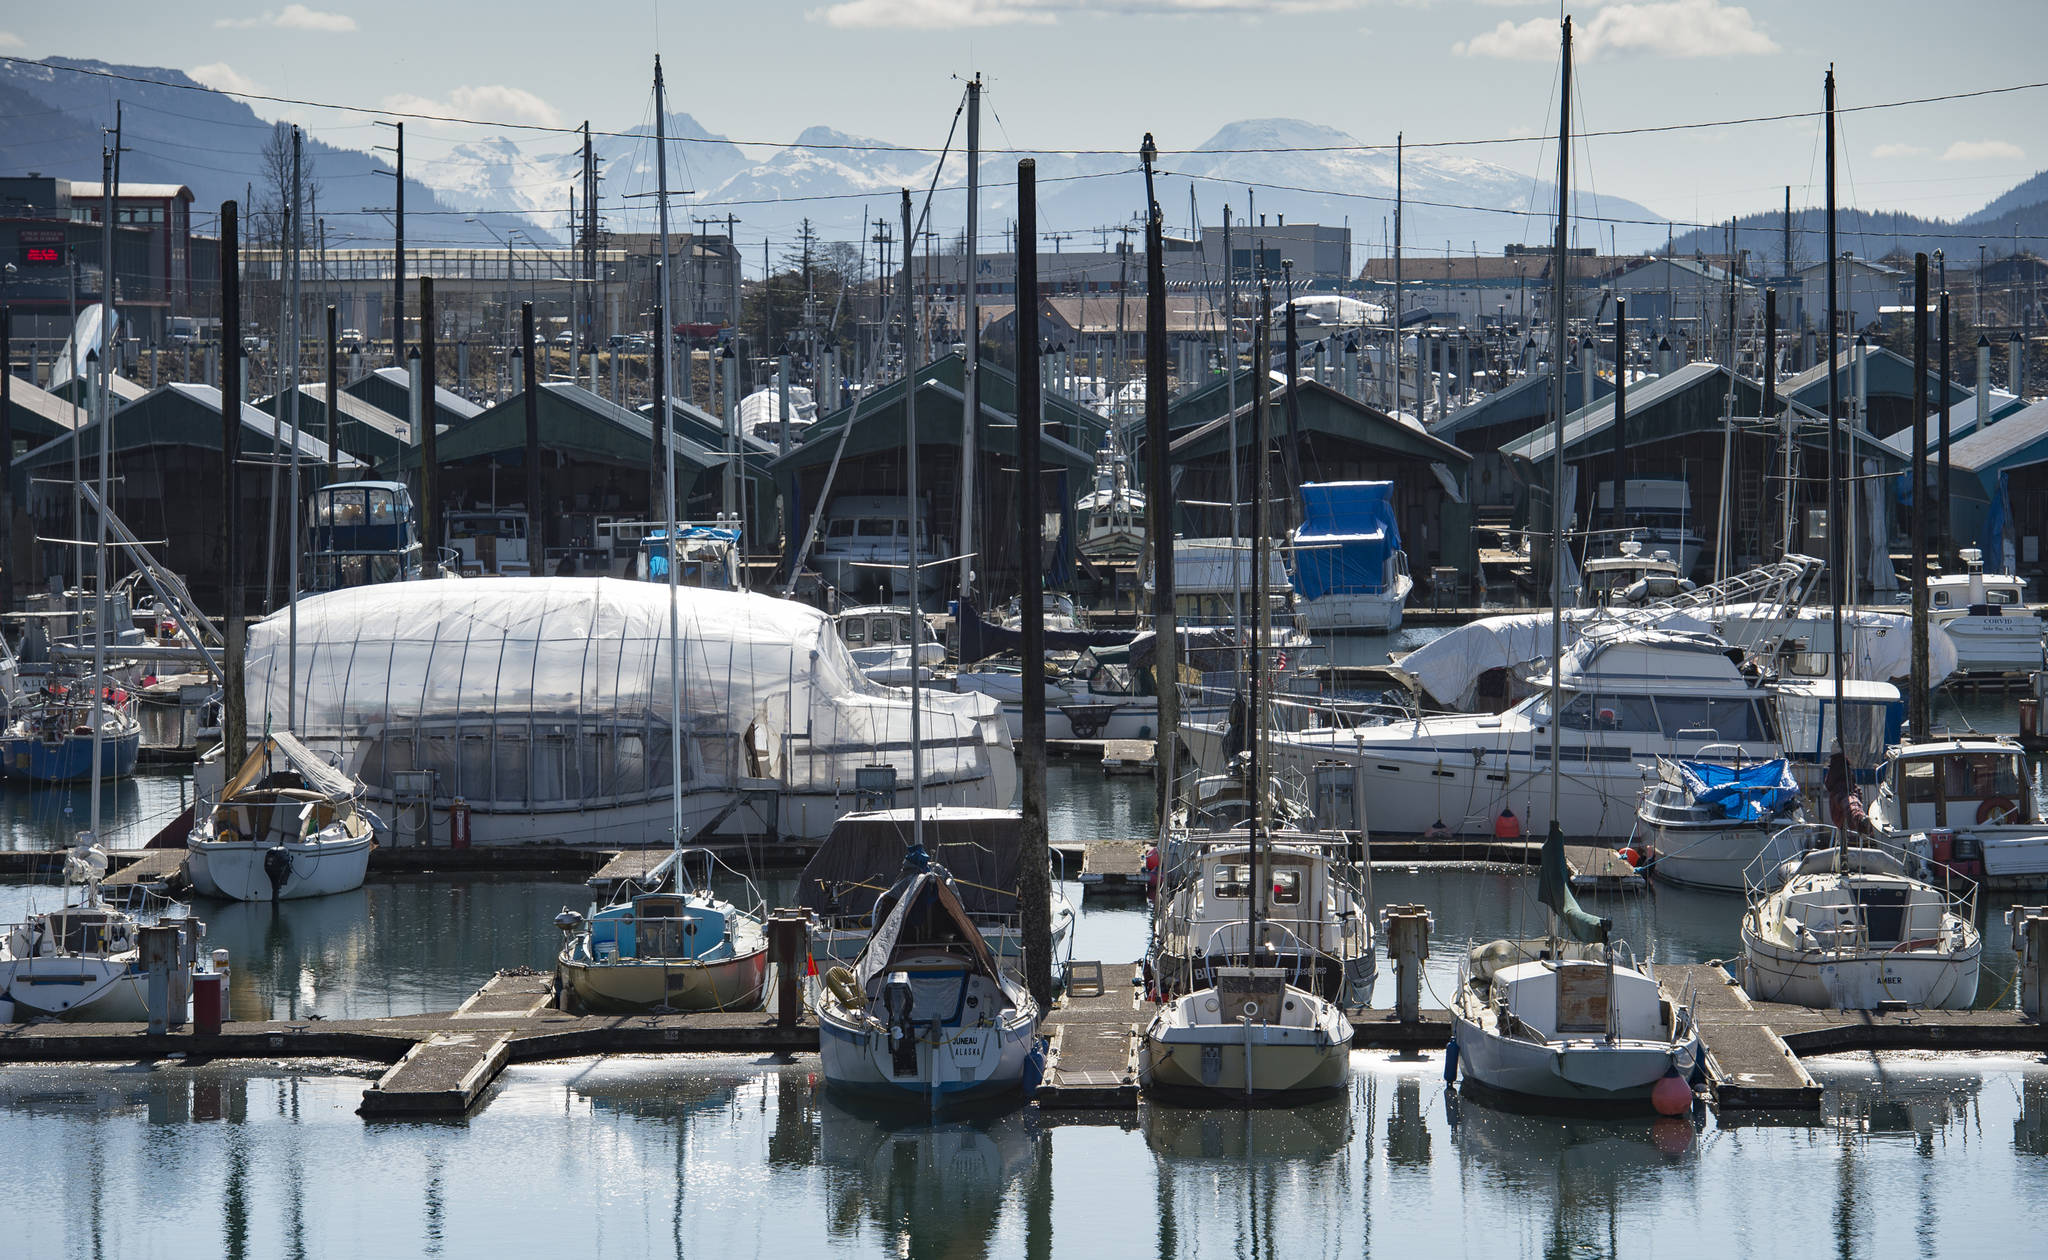 Juneau Empire File Don Statter Memorial Boat Harbor in Auke Bay in July 2015 as visitors wait to board whale watching vessels and fishing boats are double and triple parked along the floats.